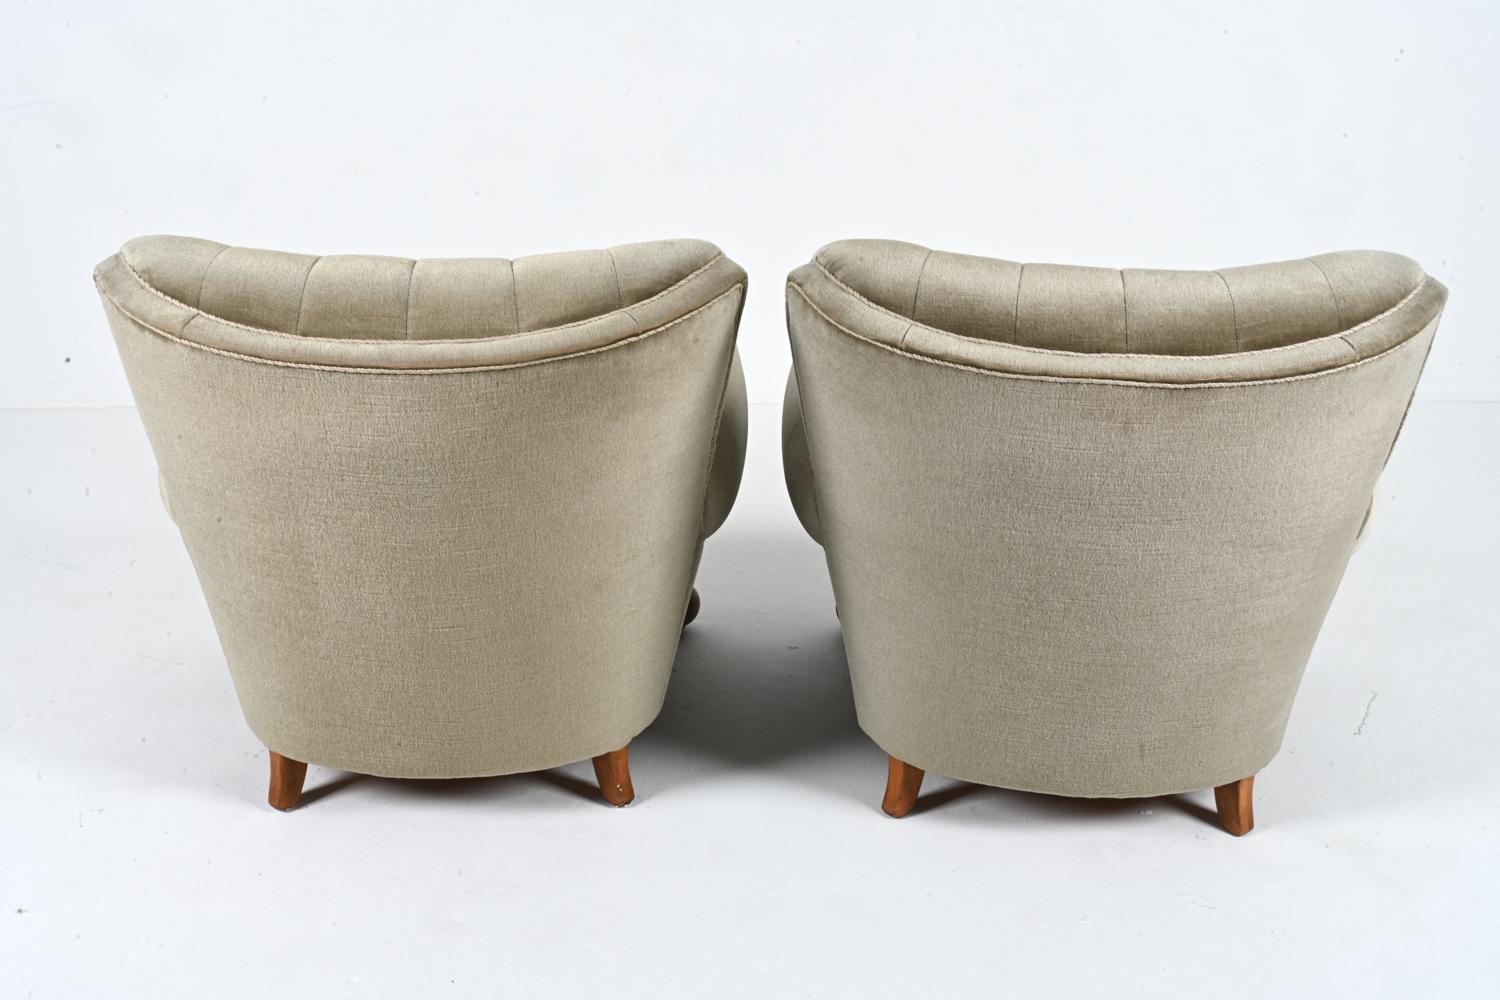 Pair of European Roll-Arm Club Chairs in Mohair and Beech, c. 1940's For Sale 9